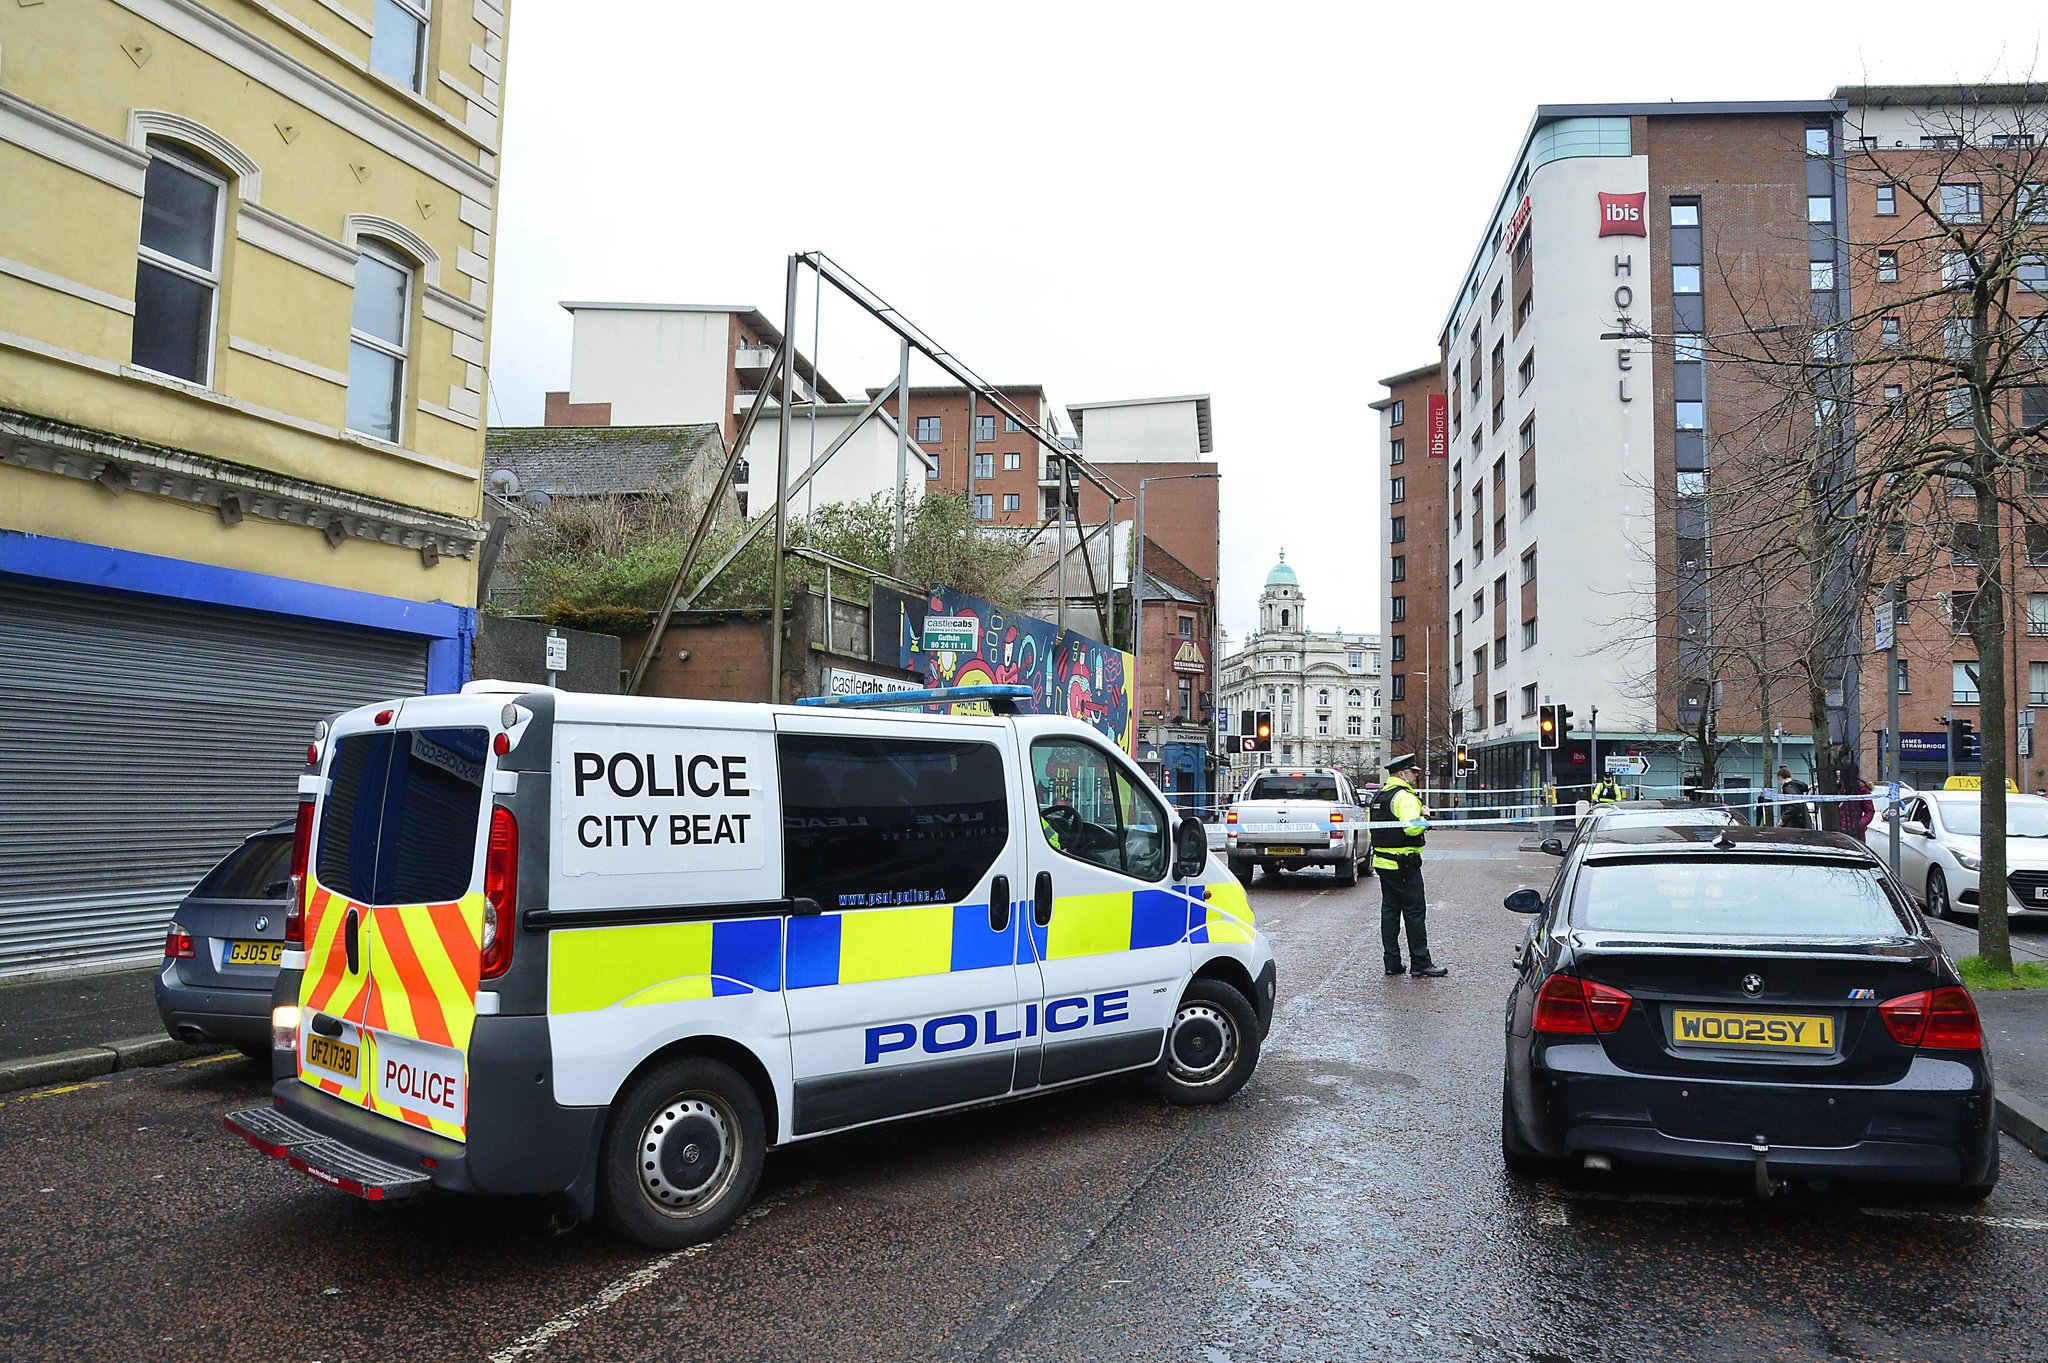 In PICTURES: City street closed after 'partial collapse of building wall'